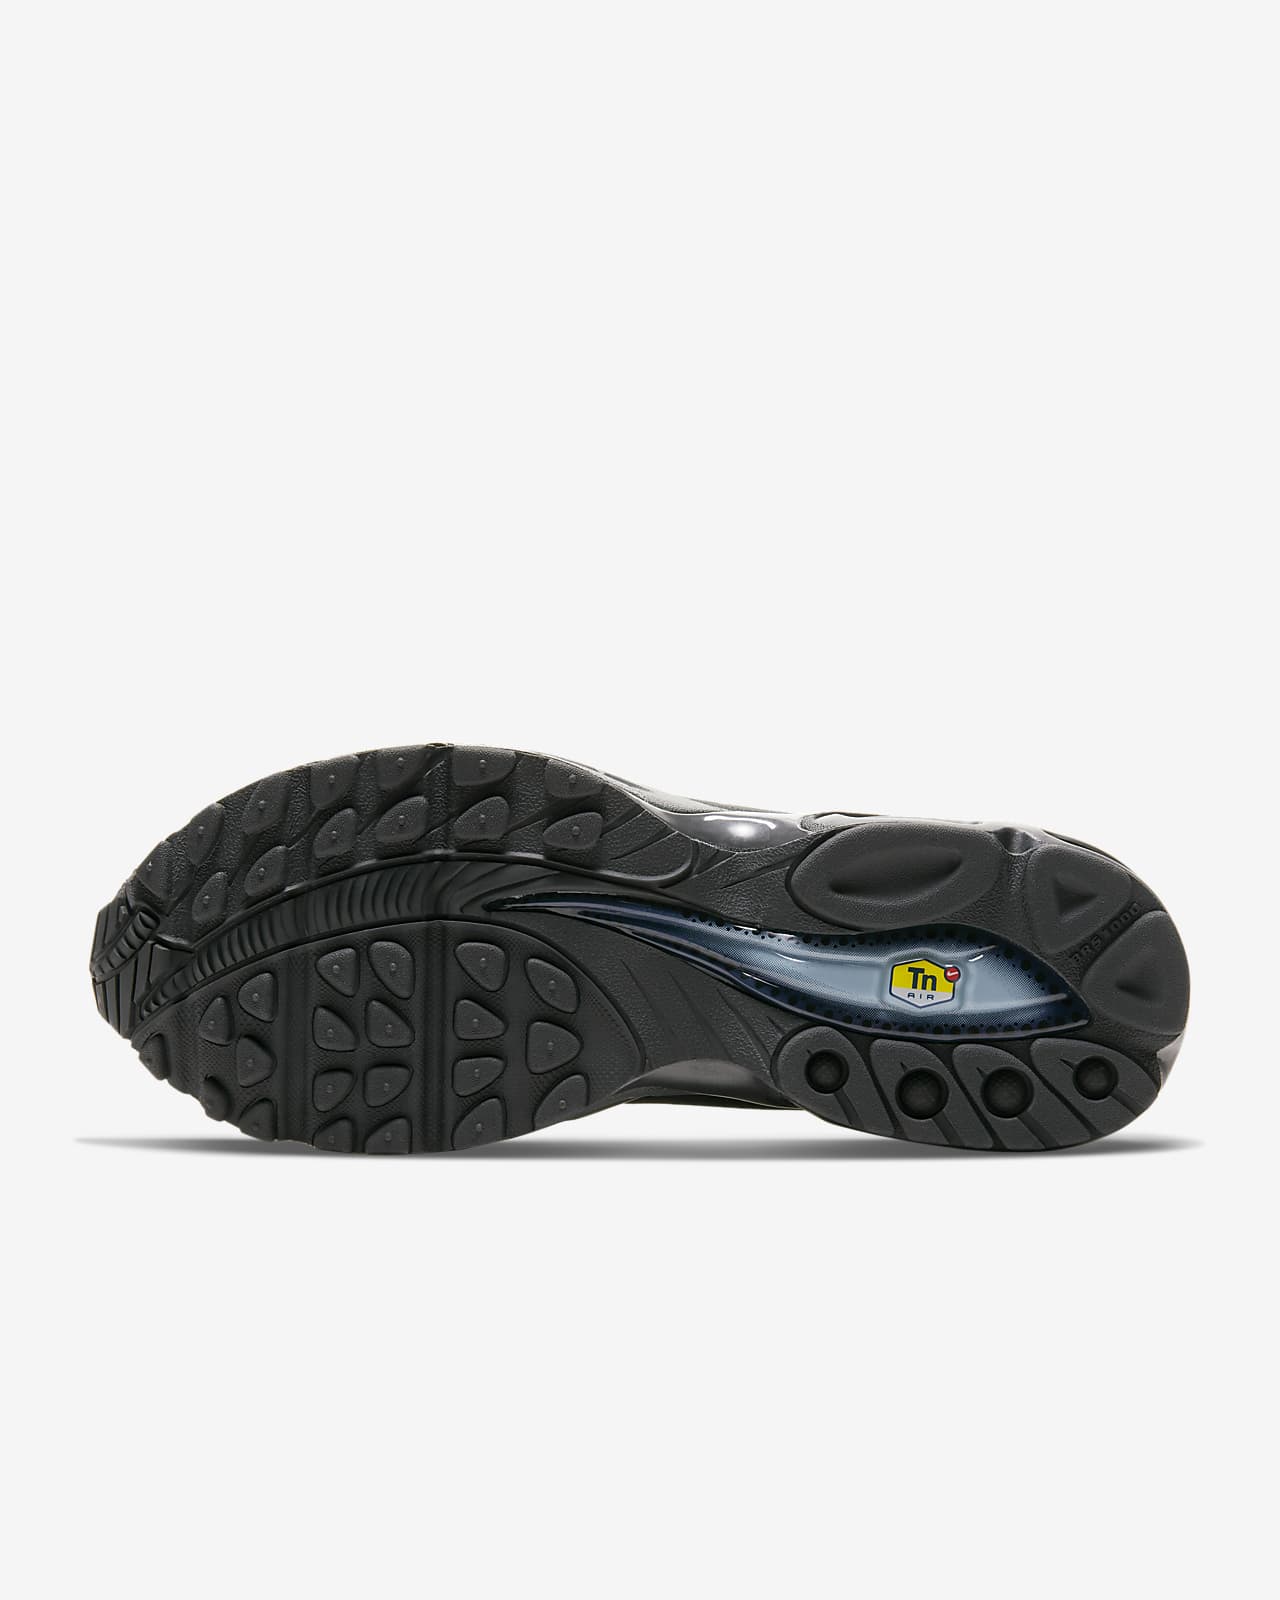 nike air max tailwind 8 price philippines